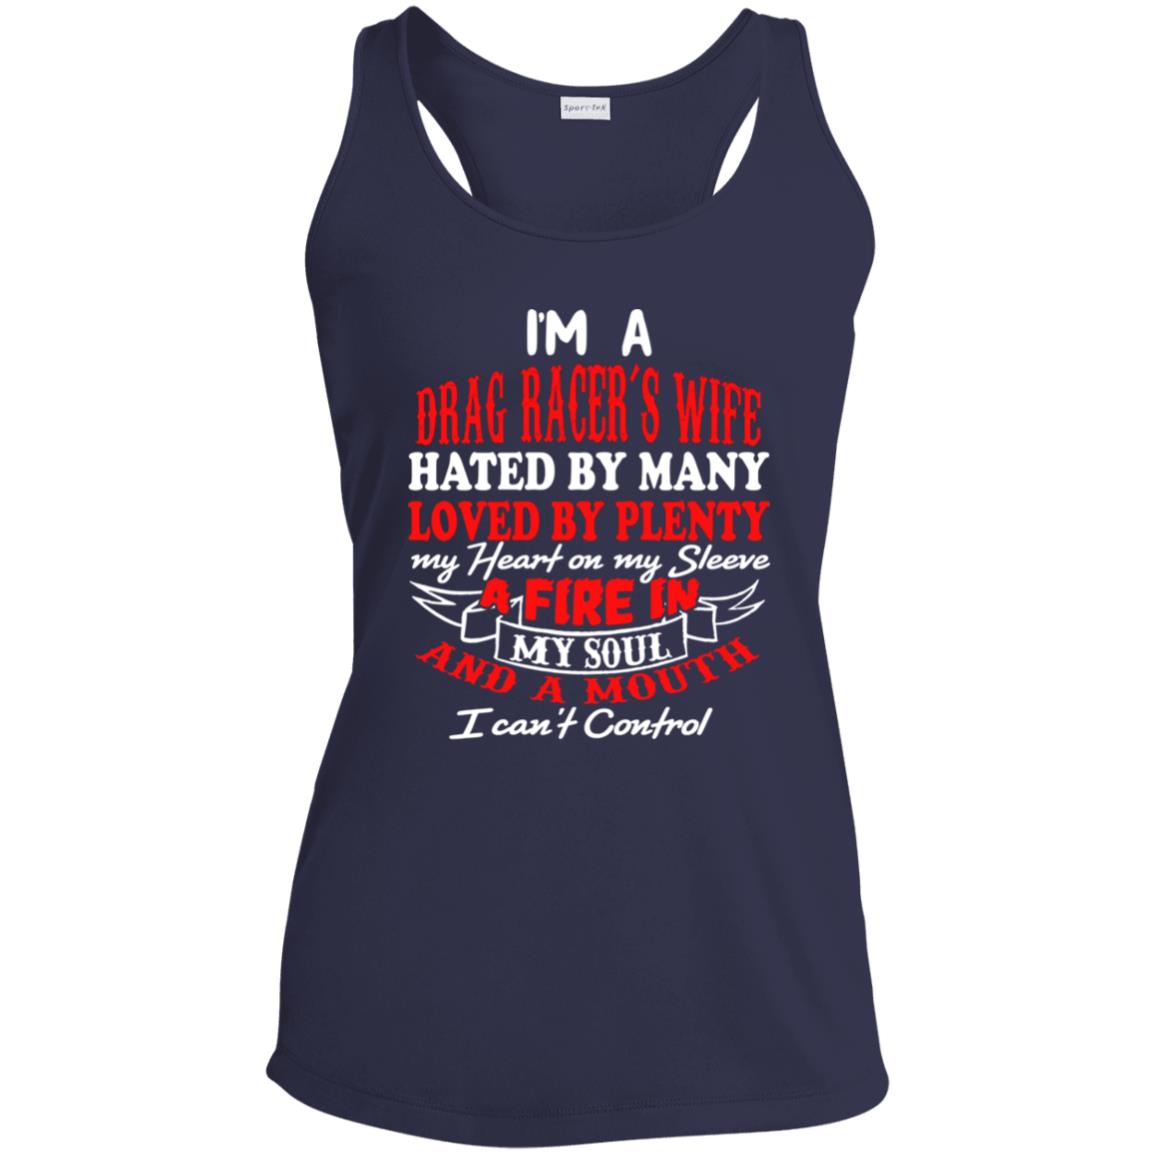 I'm A Drag Racer's Wife Hated By Many Loved By Plenty Ladies' Performance Racerback Tank